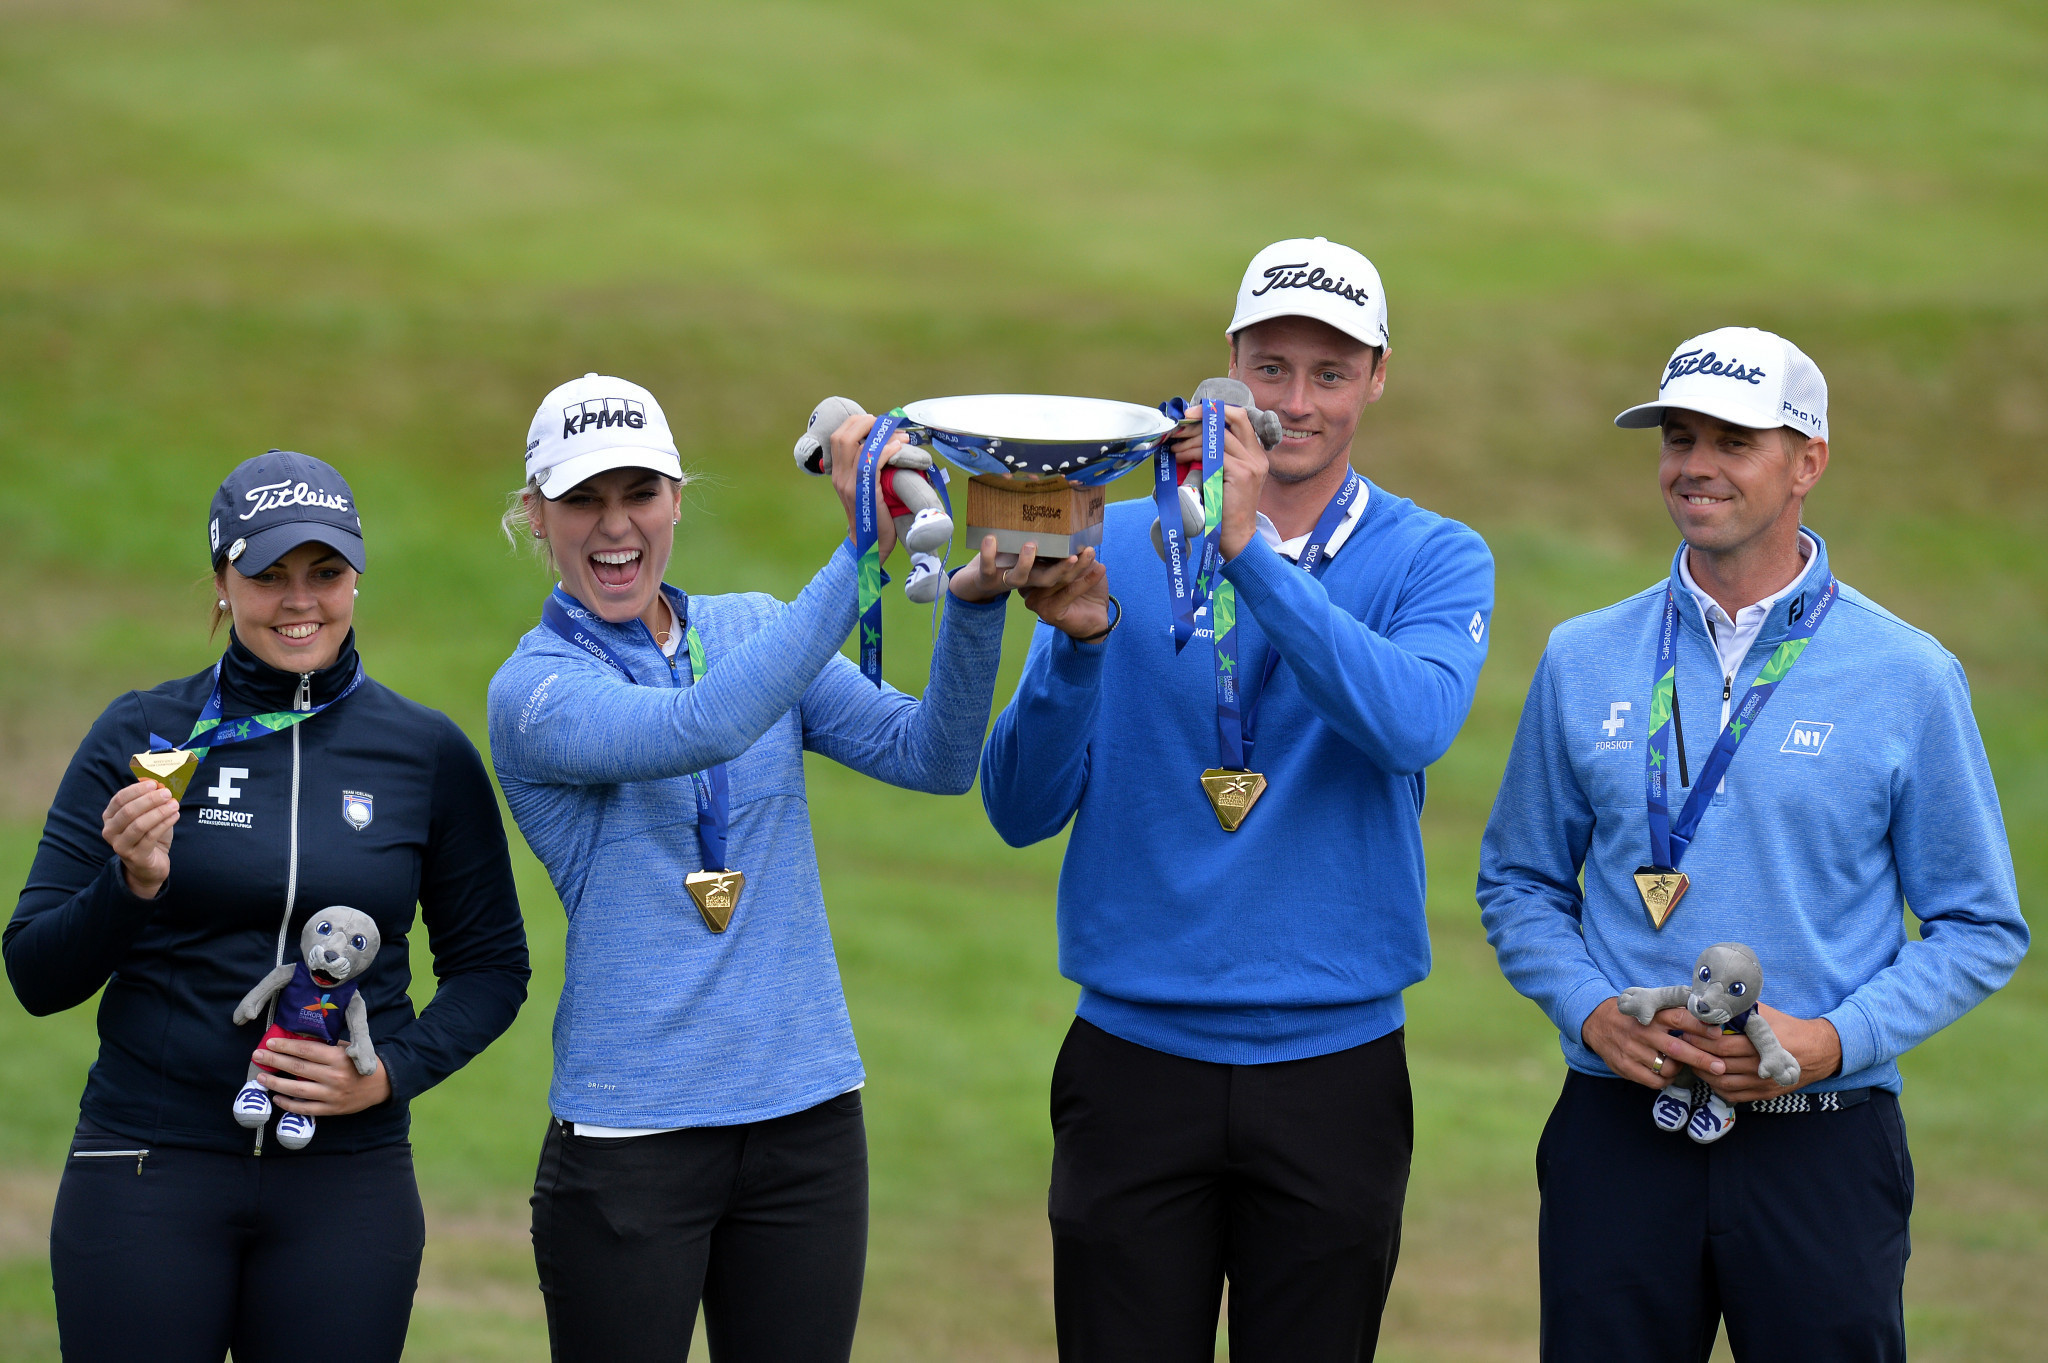 Iceland made history by winning the first European mixed team golf title at Gleneagles ©Getty Images